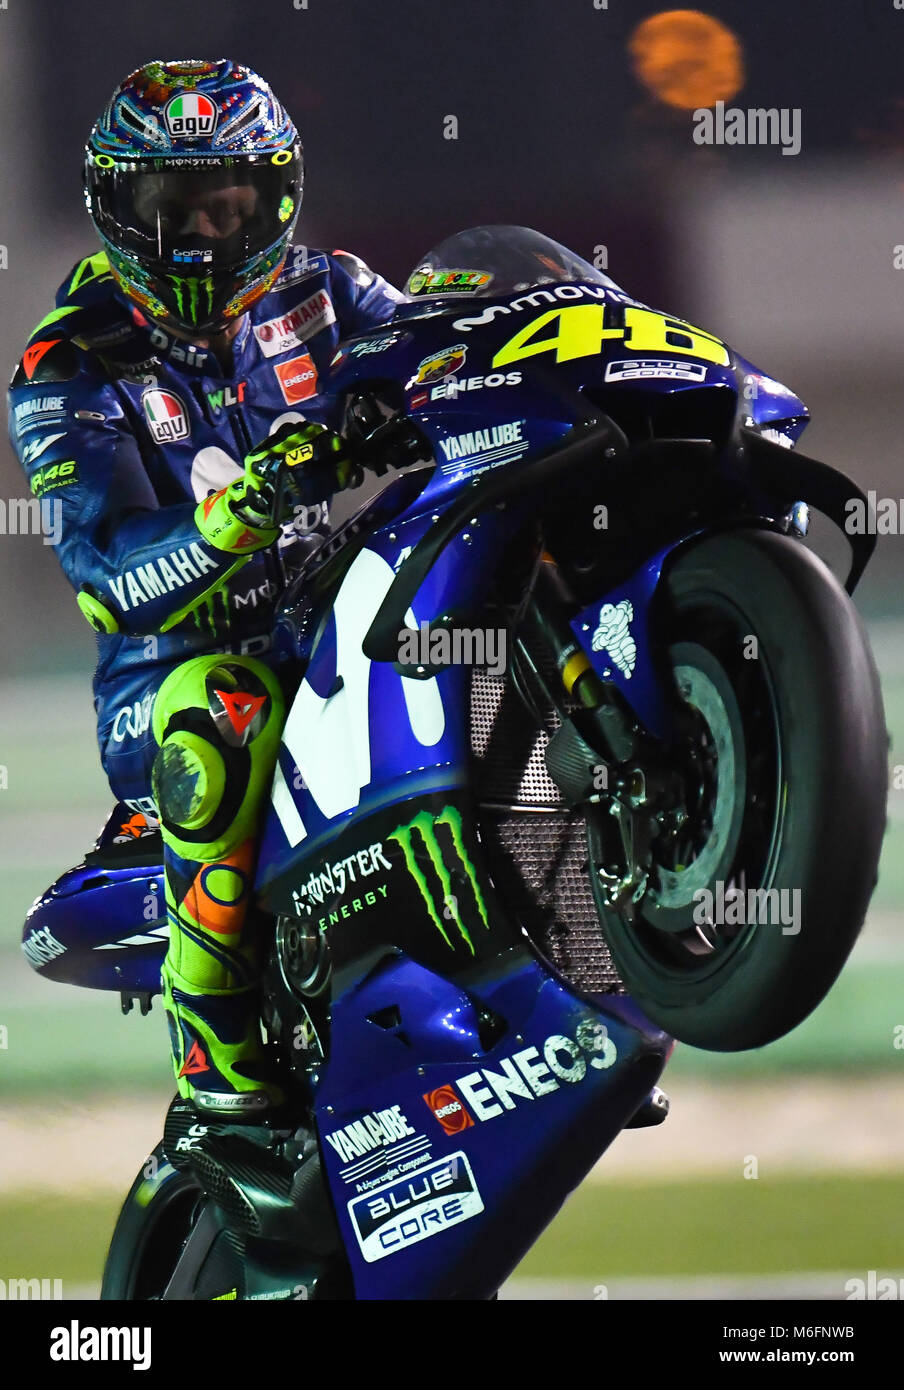 Valentino Rossi Bike High Resolution Stock Photography and Images - Alamy